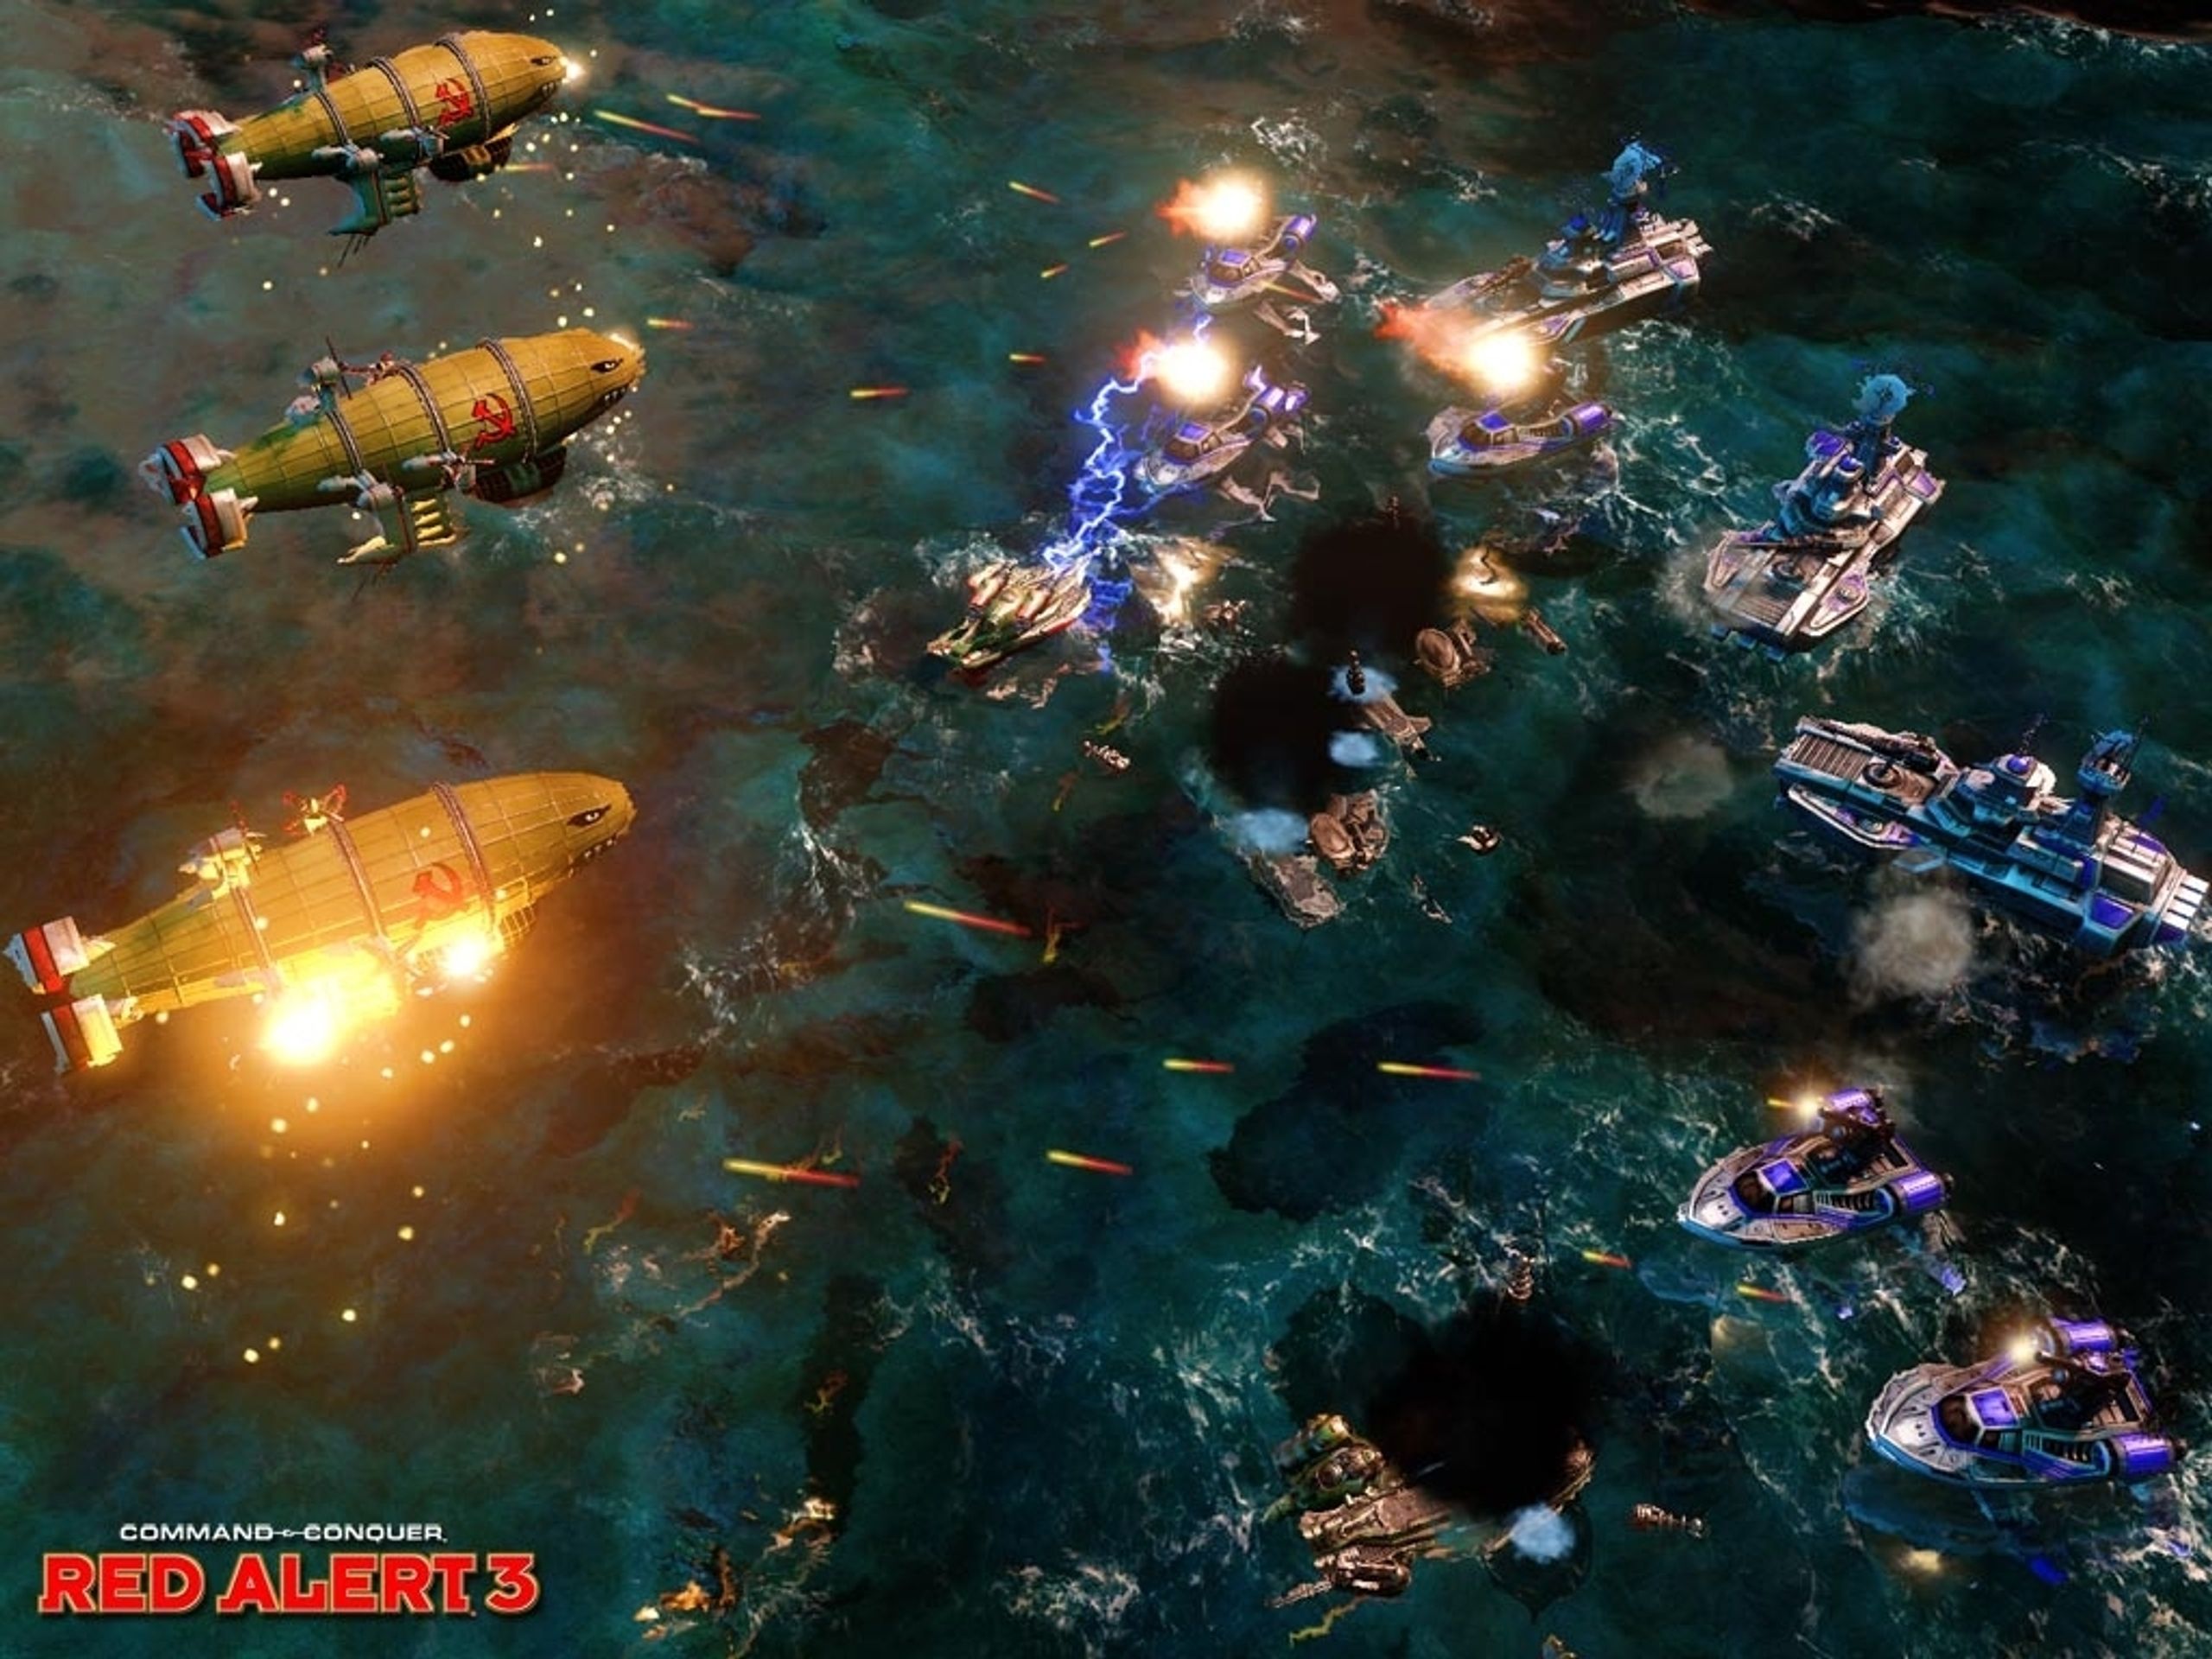 Command & Conquer: Red Alert 3 - Red Alert 3 galerie (11/16)